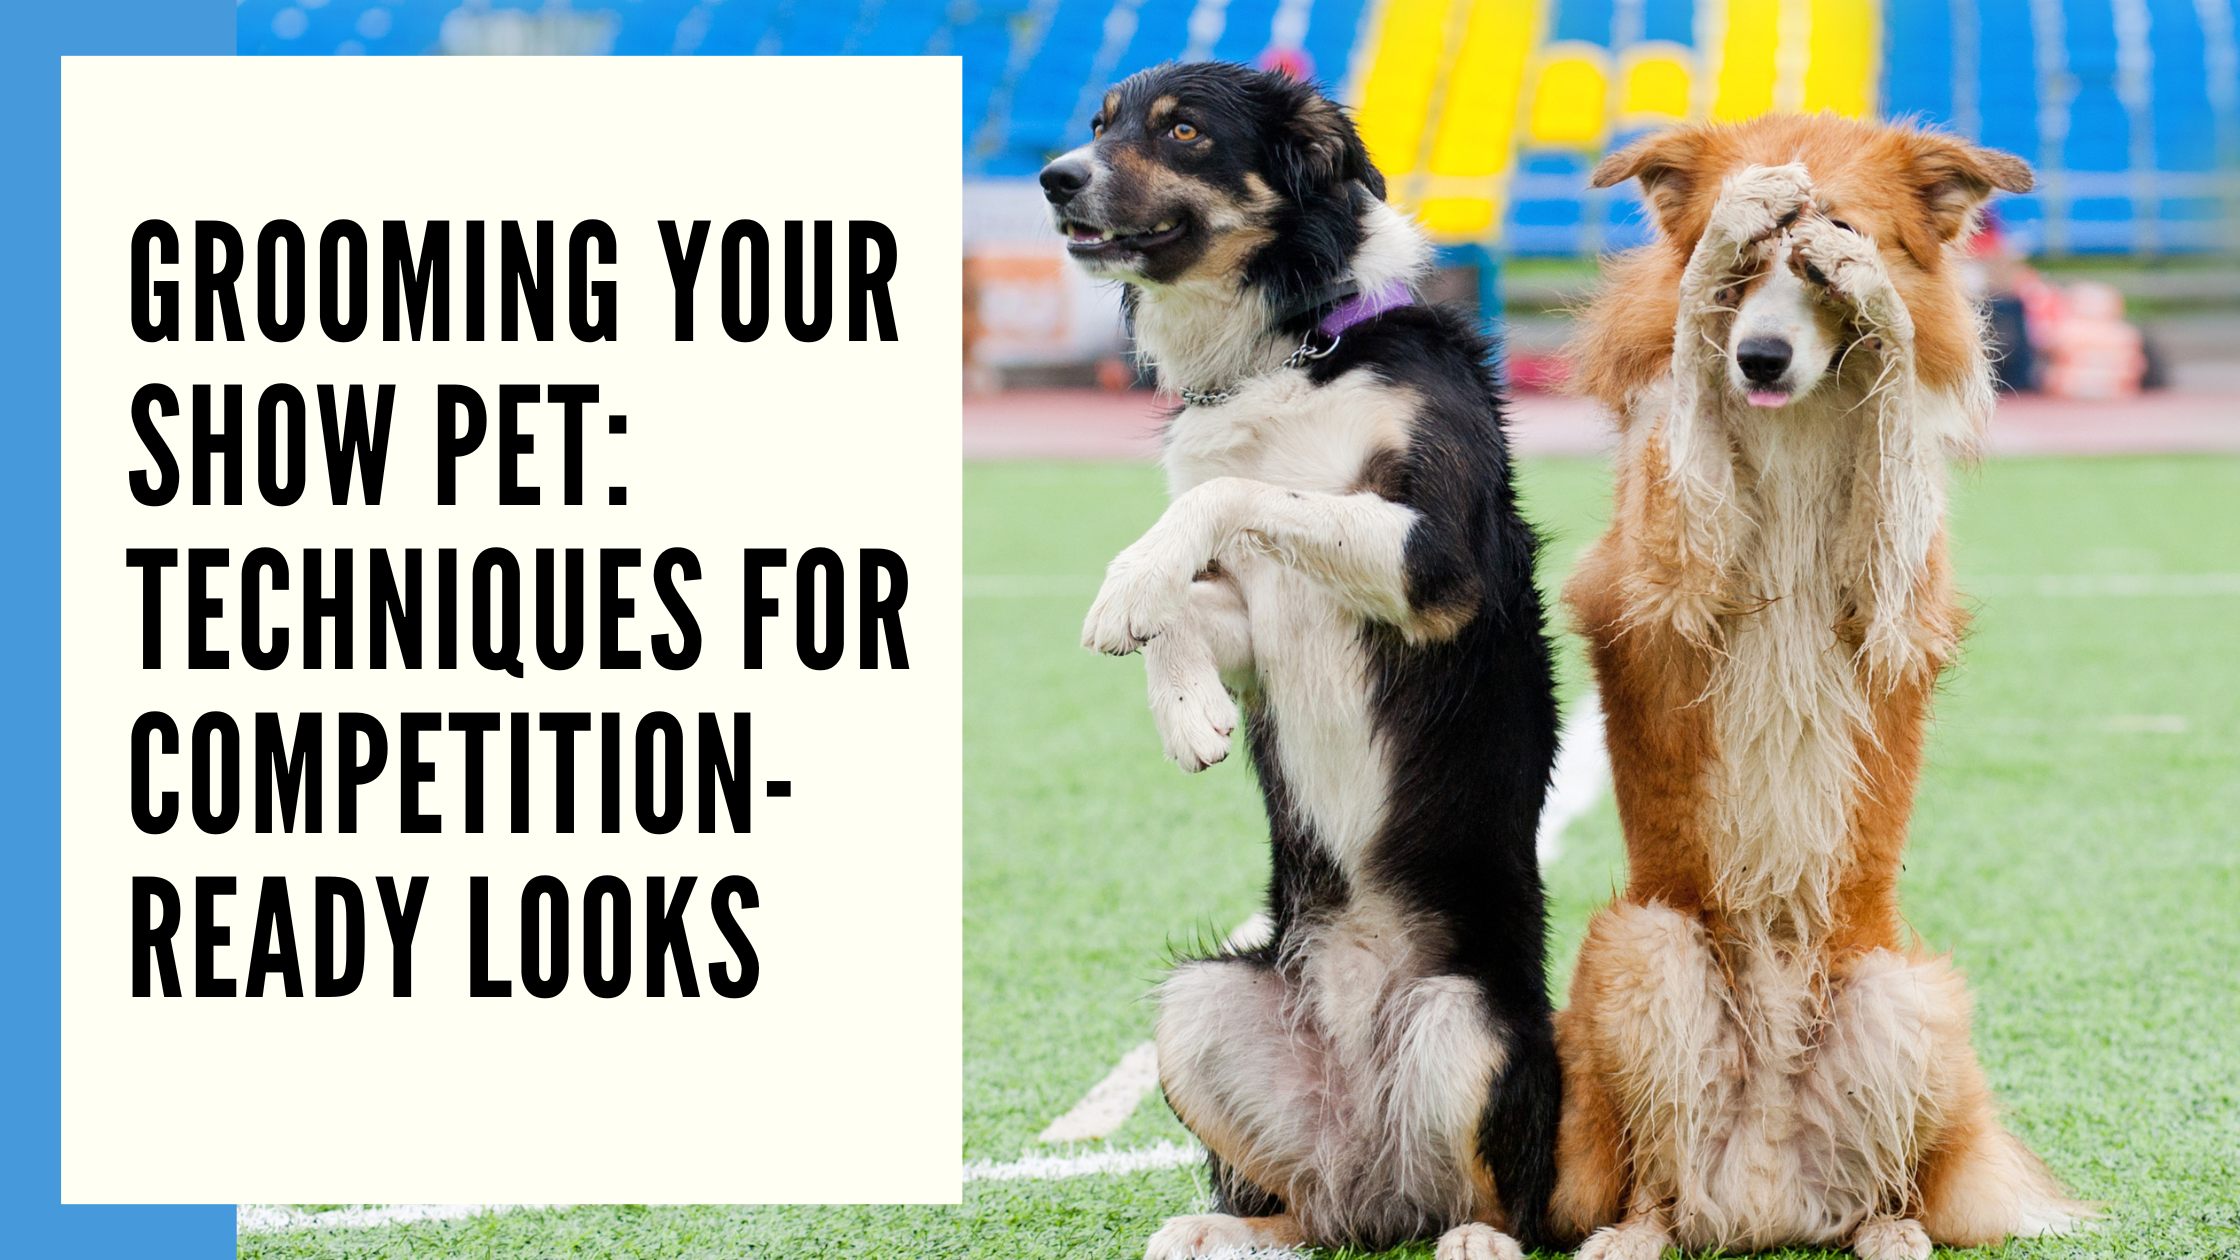 Grooming Your Show Pet Techniques for Competition-Ready Looks